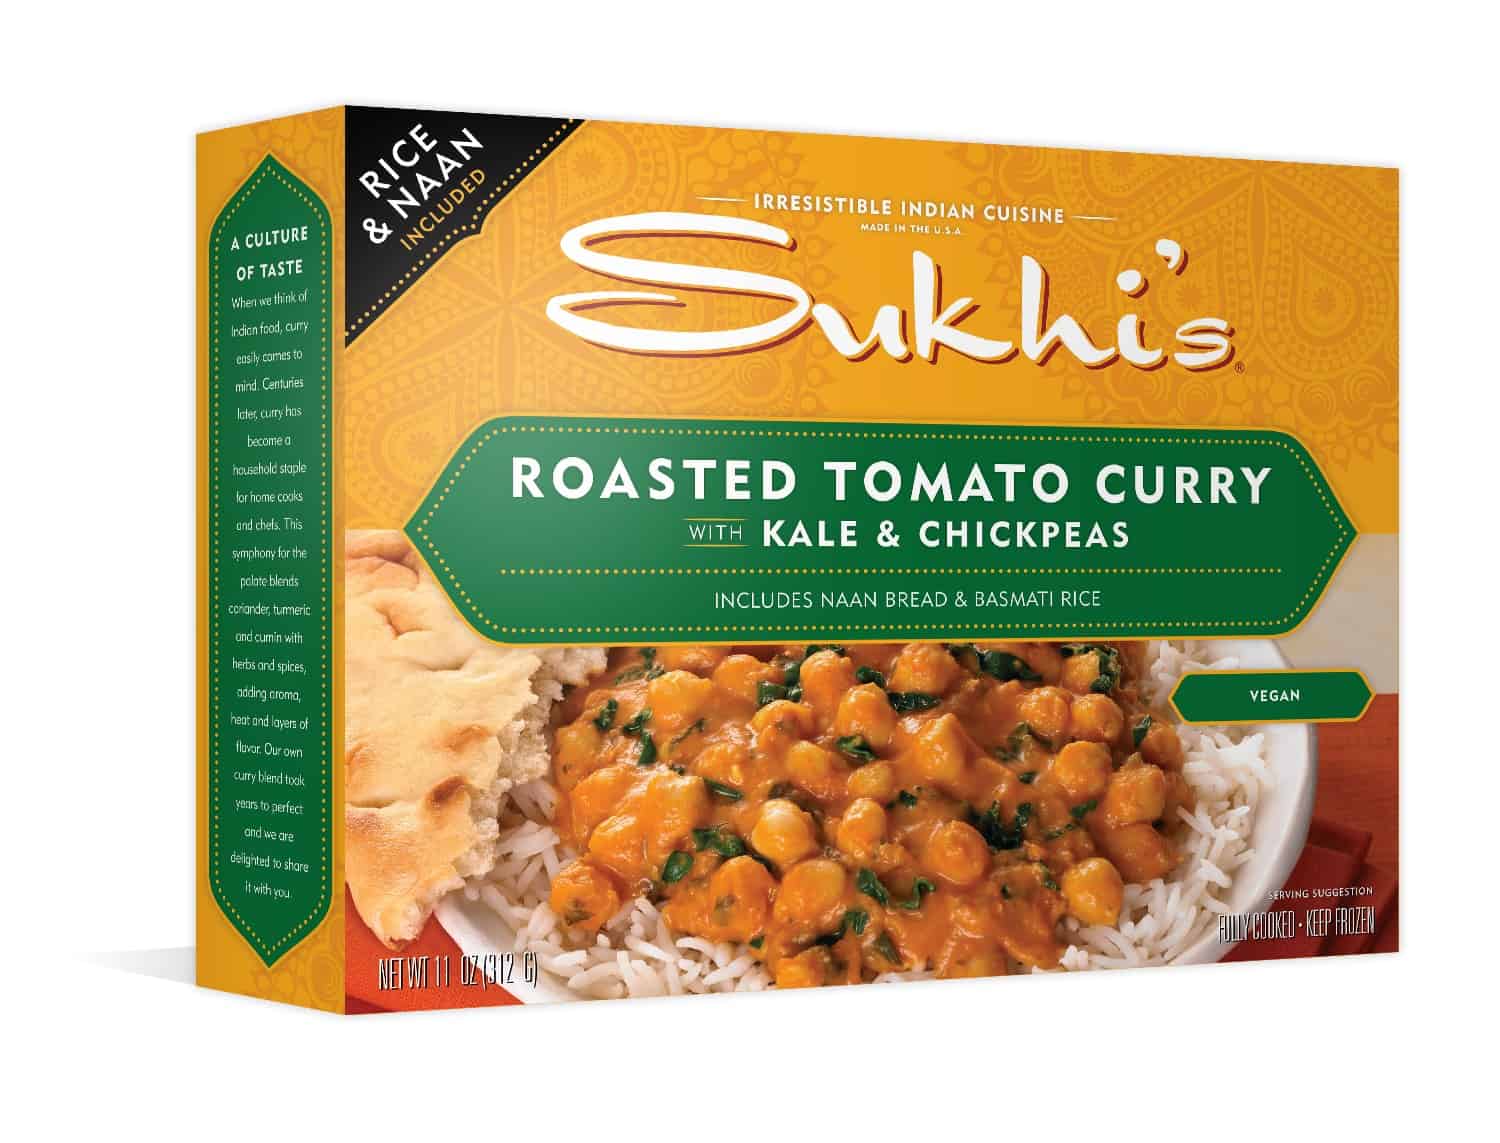 Sukhi's vegan curry with roasted tomato, kale and chickpeas